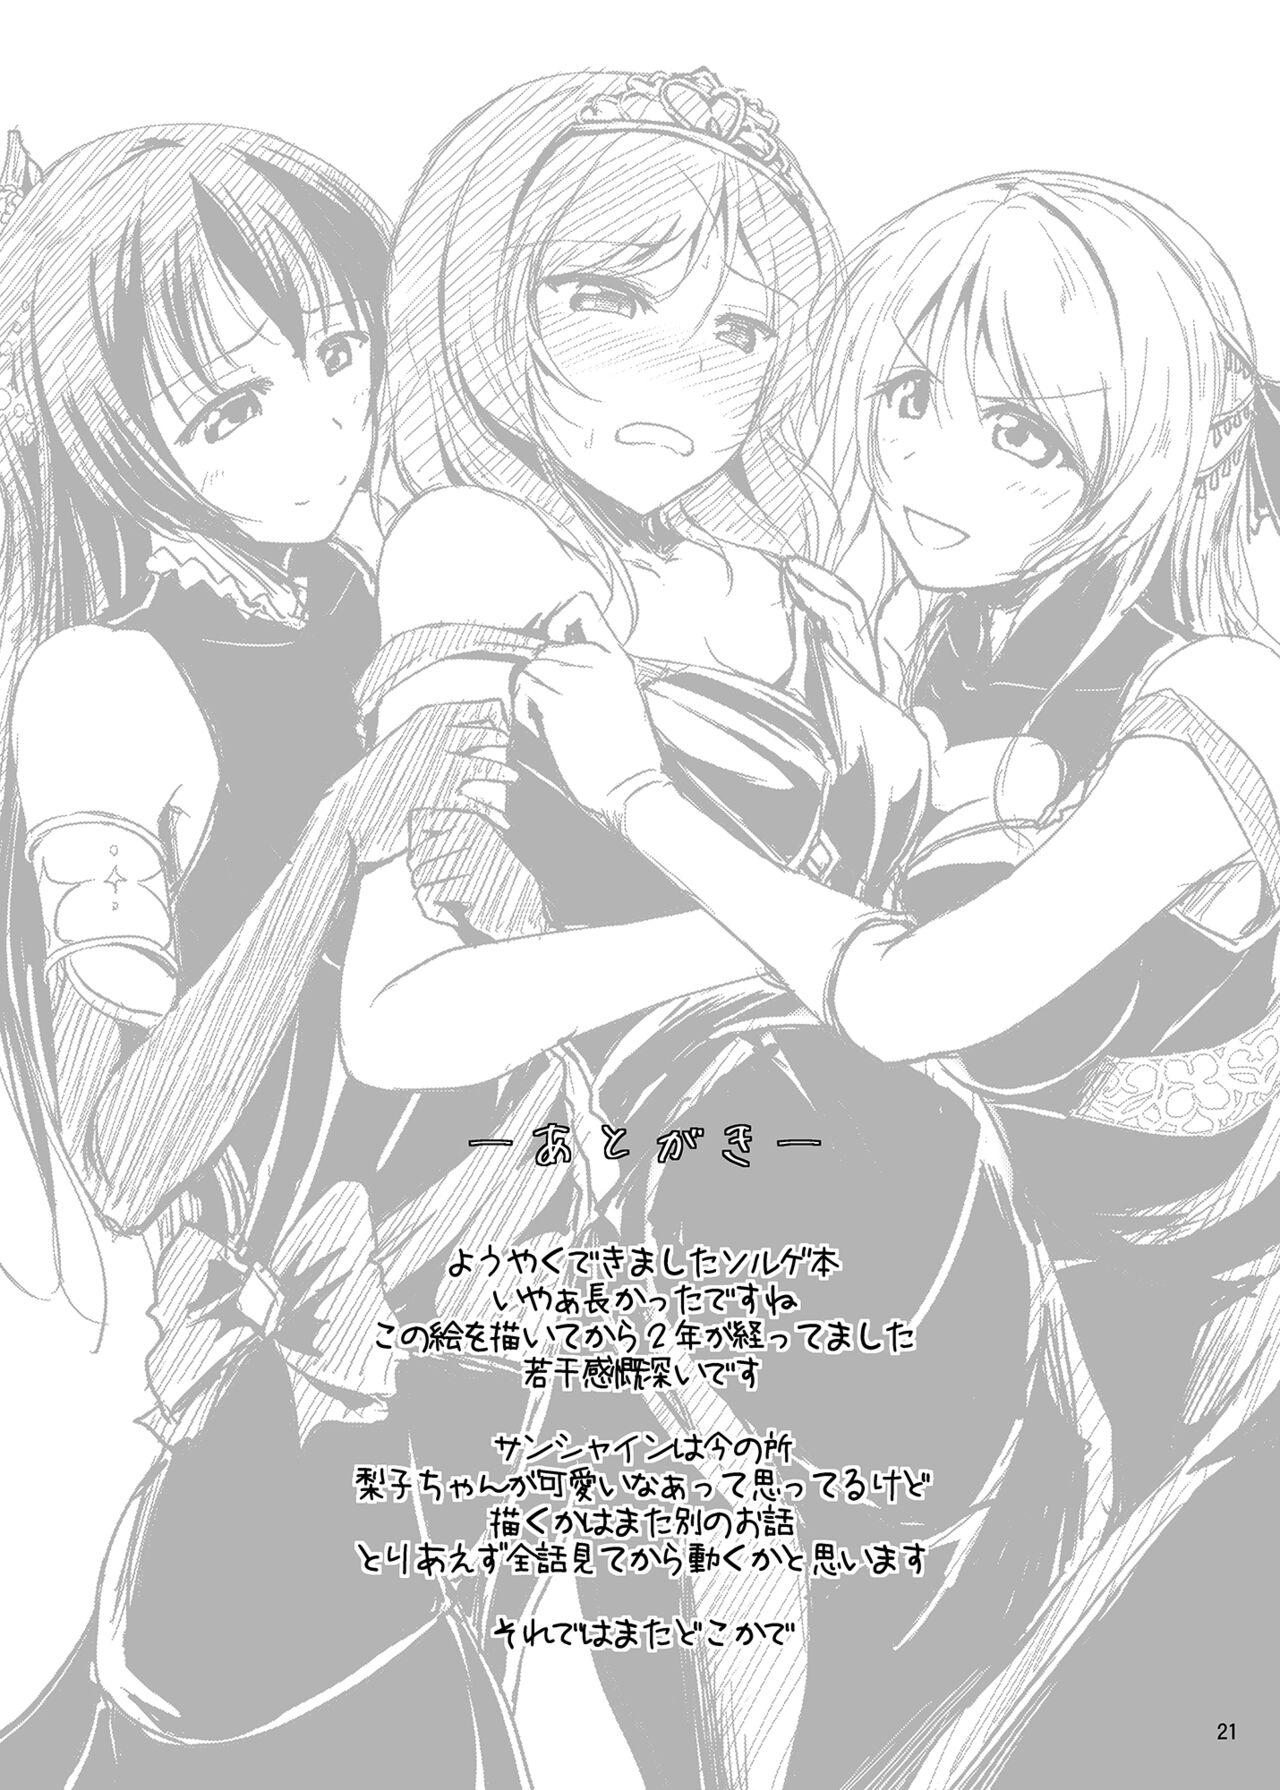 Actress secret in my heart - Love live Innocent - Page 21